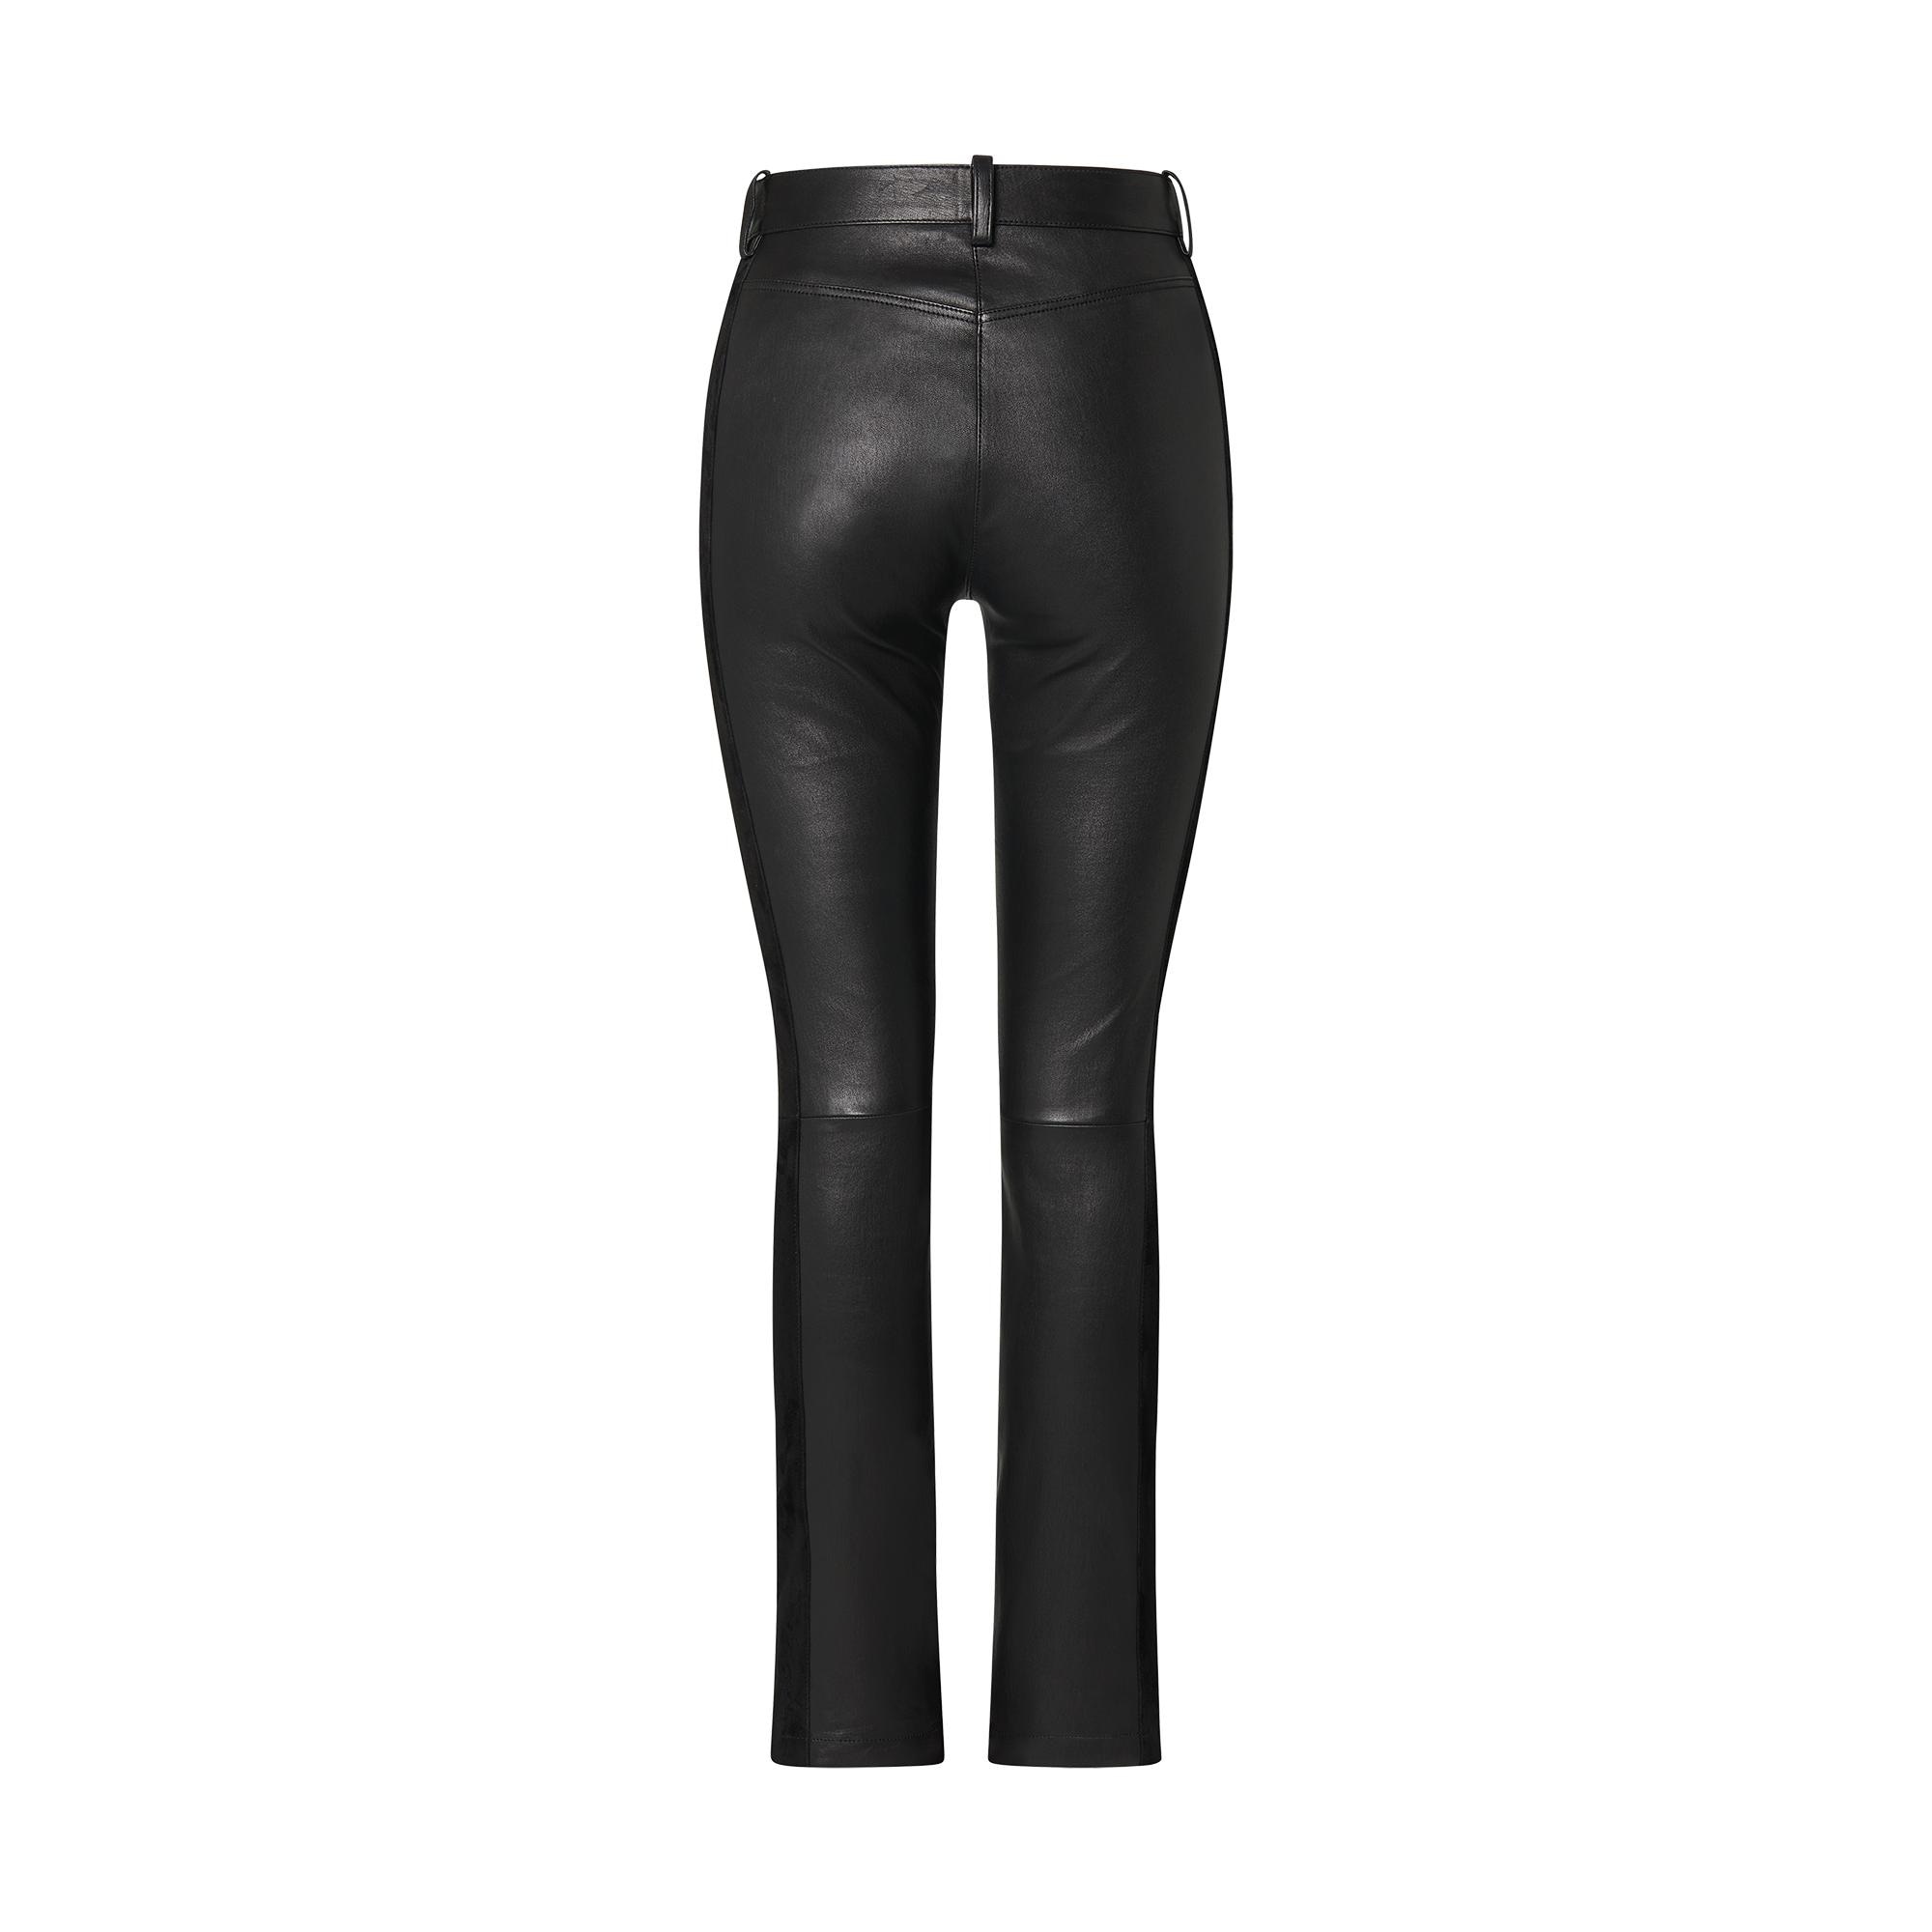 Suede Insert Leather Pants - 3